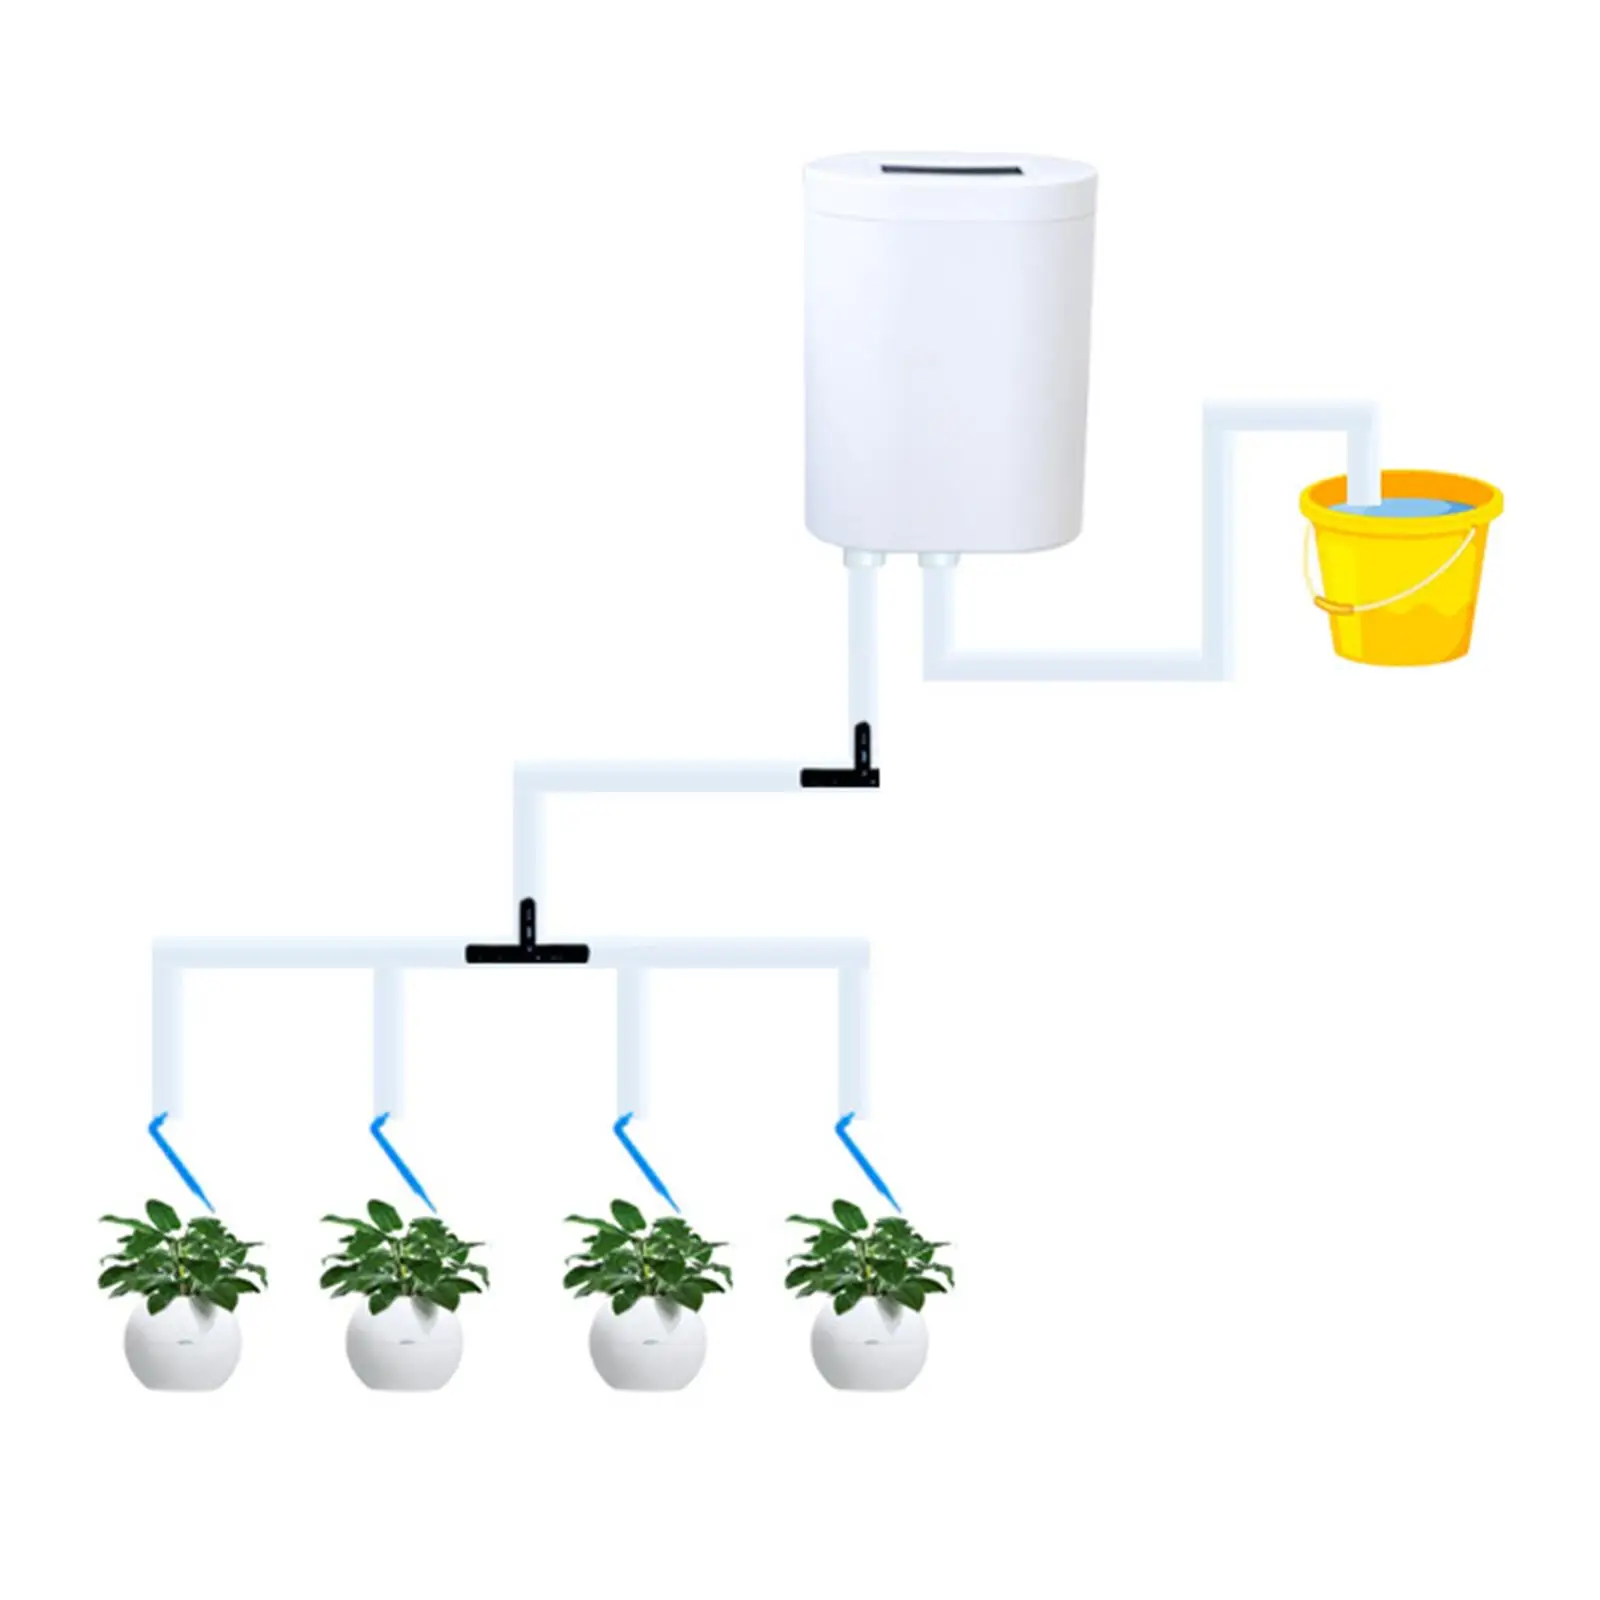 Indoor Electronic Watering Pump Device DIY Sprinkler Plant Watering Timer System Kits for Vacation Flowers Potted Lawn Garden